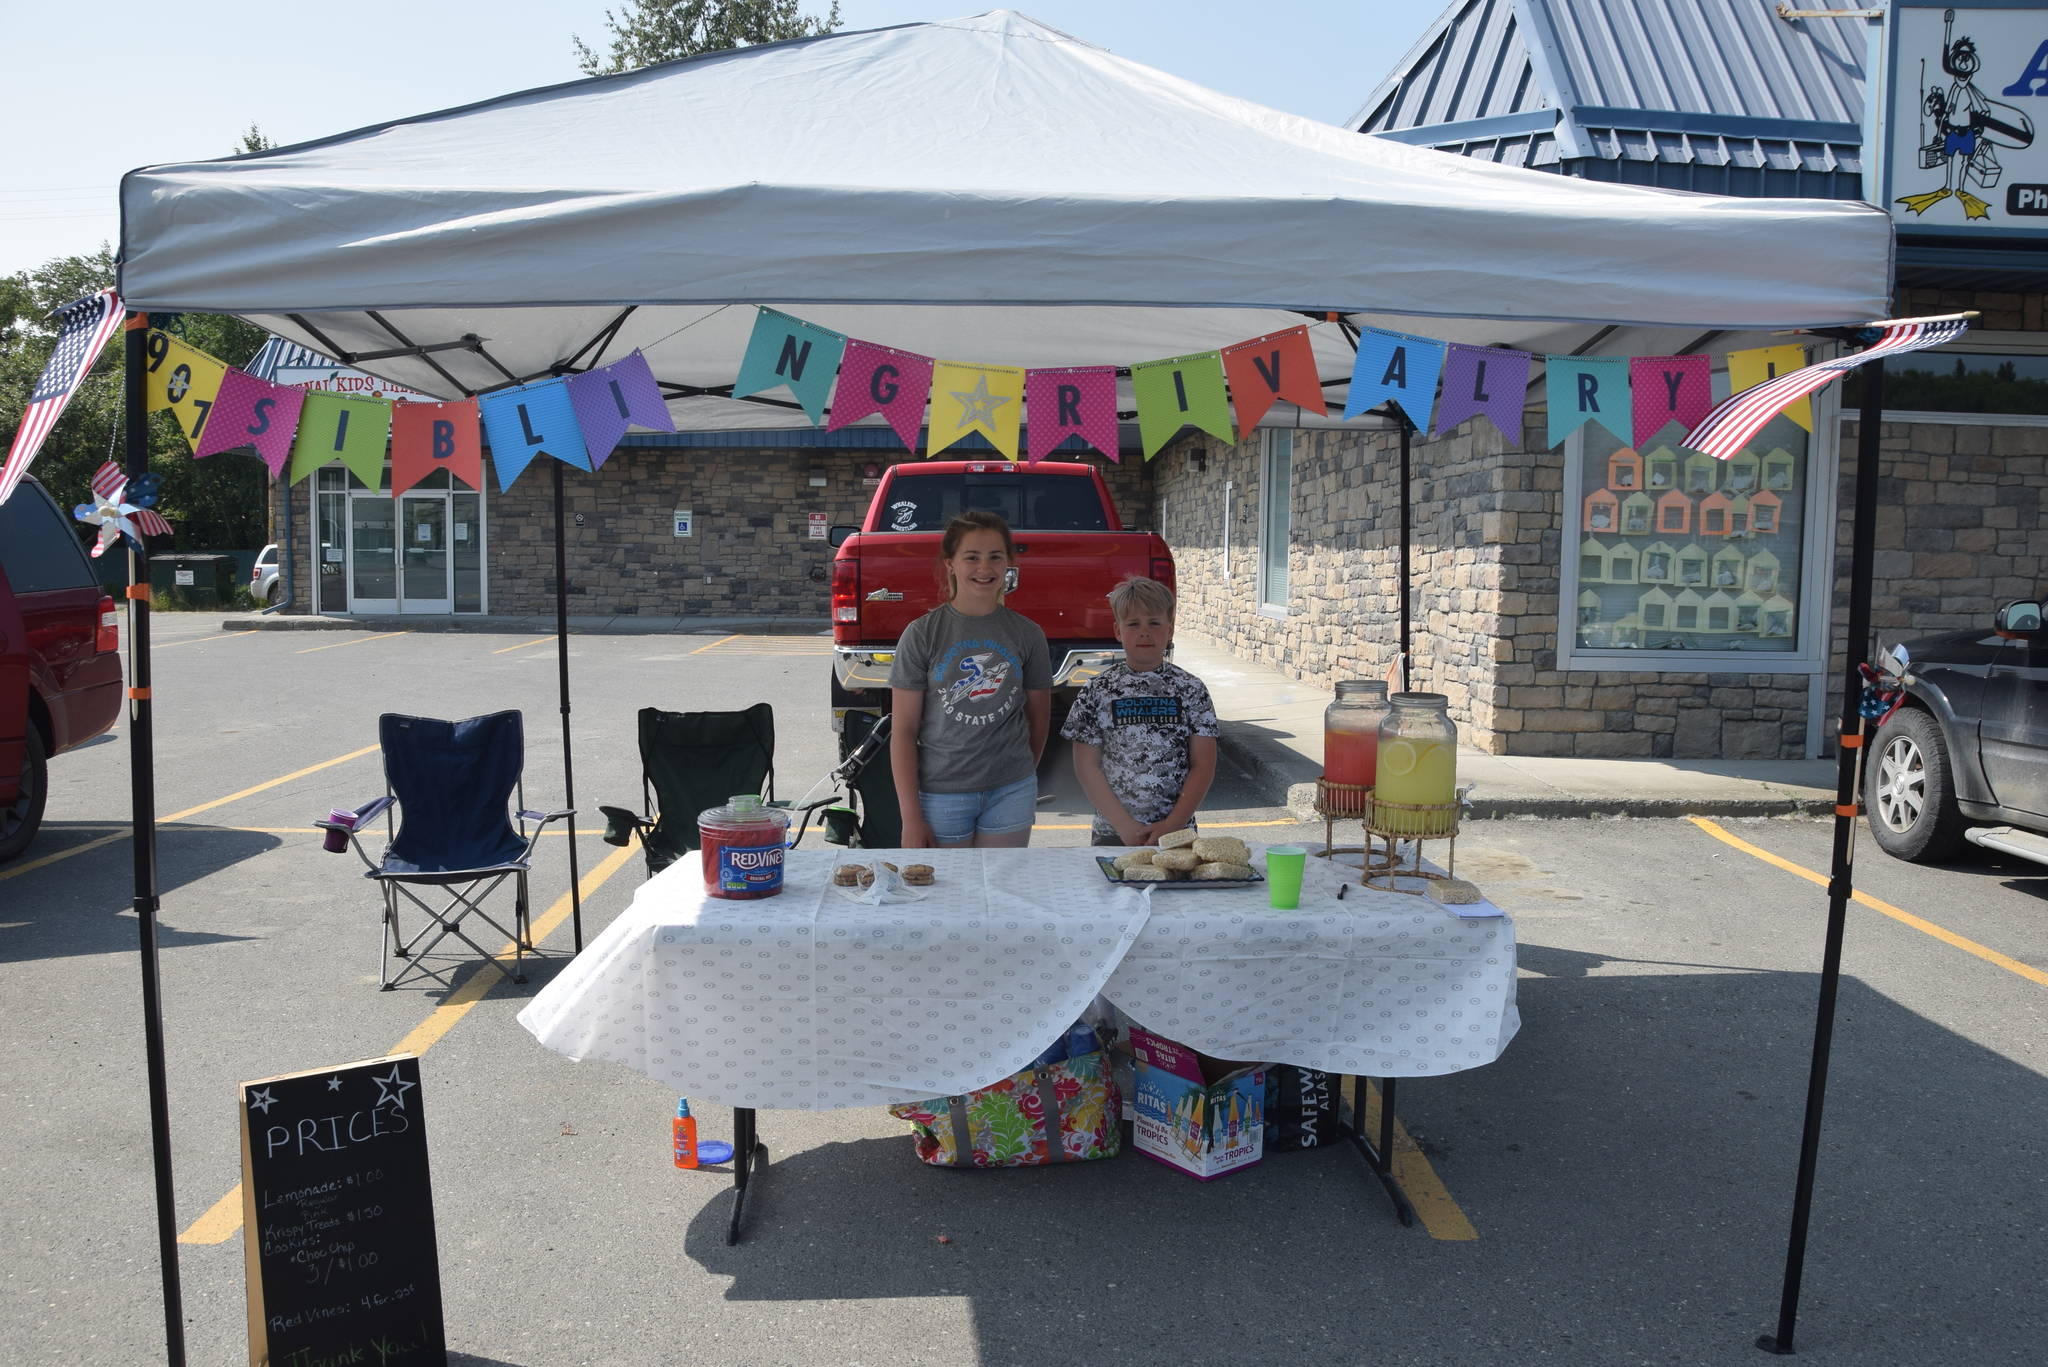 Avery Powell, left, and Nathan Powell, right, smile for the camera at their lemonade stand outside of Kenai Kids Therapy during Lemonade Day in Soldotna, Alaska on June 29, 2019. (Photo by Brian Mazurek/Peninsula Clarion)